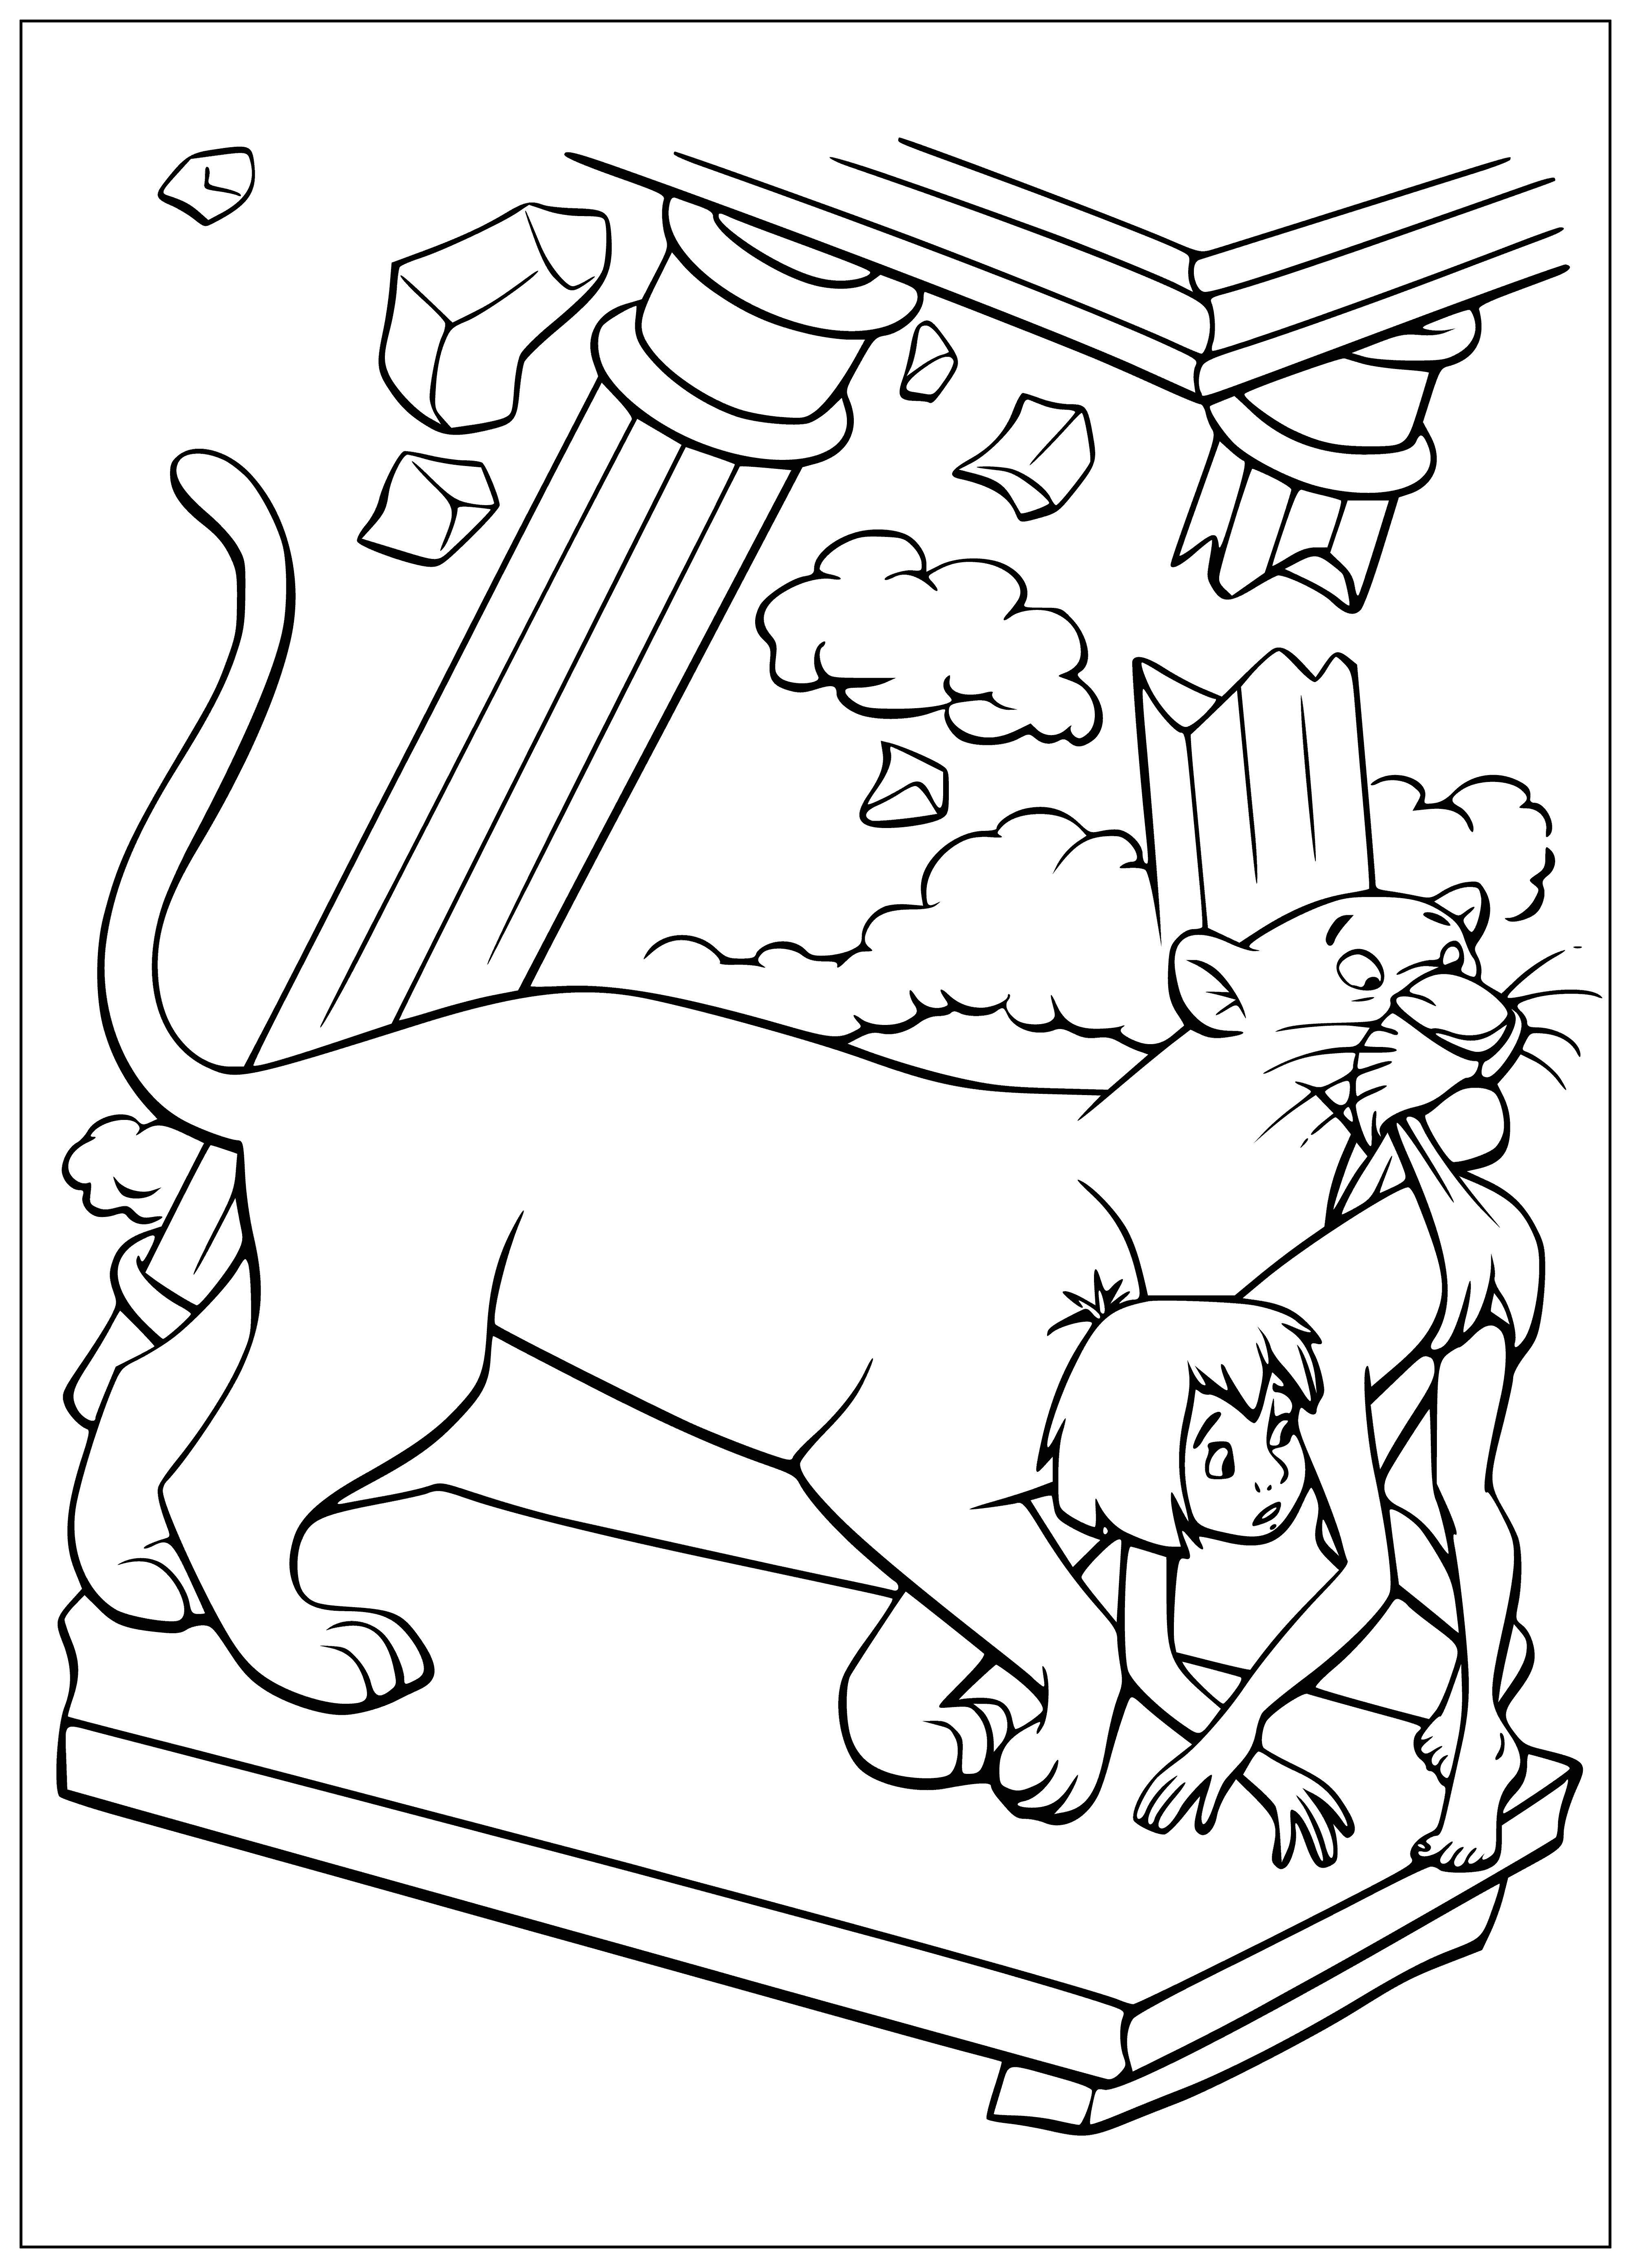 coloring page: Mowgli is surrounded by three animals - a tiger, python & lion - in a jungle scene for coloring. Bagira, the tiger, has eyes closed & Mowgli's hand on the python's head.